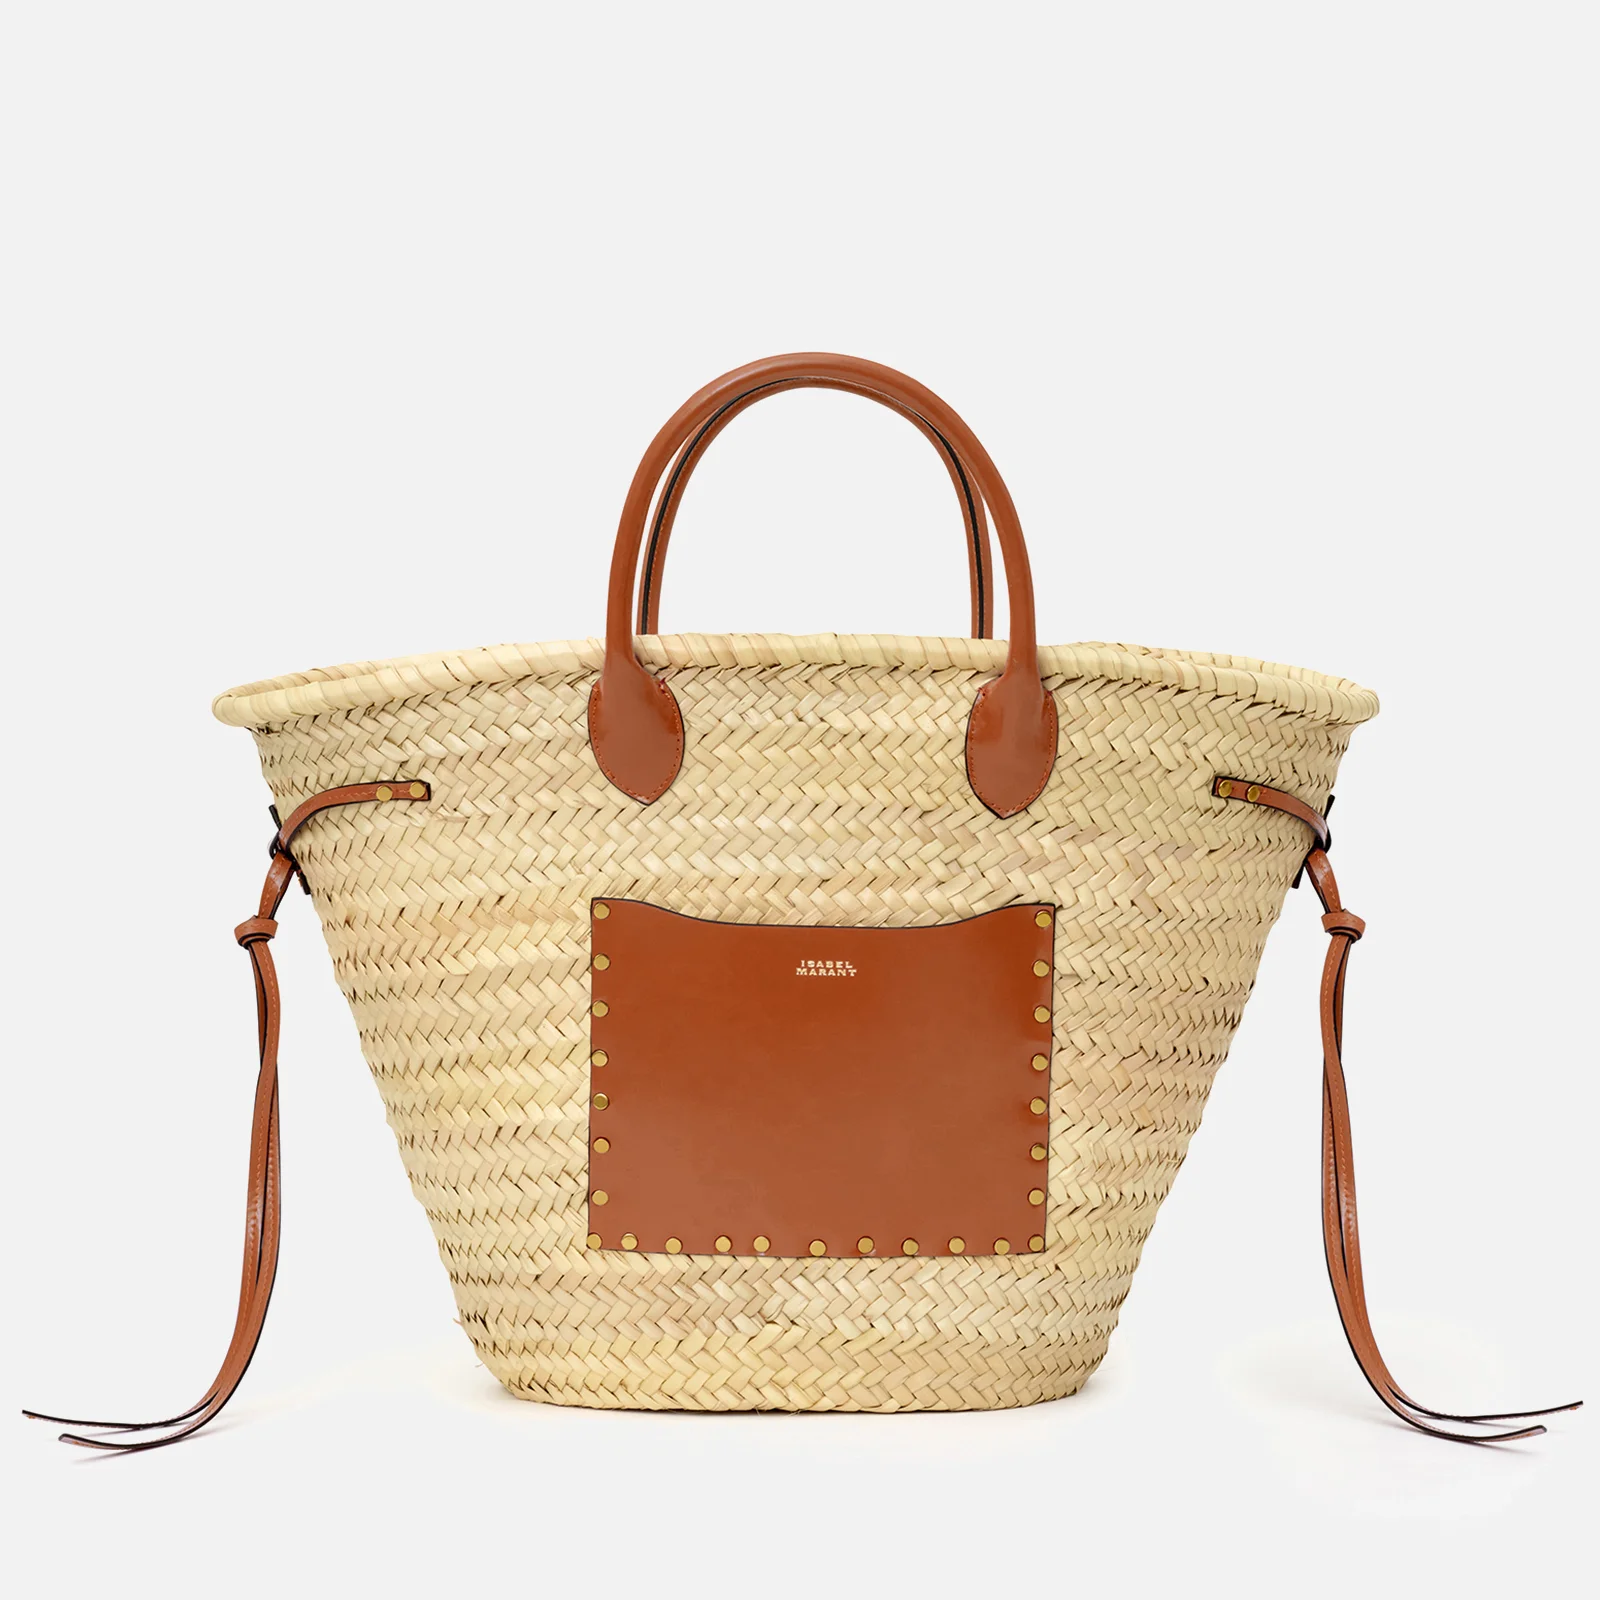 Isabel Marant Cadix Straw and Leather Tote Bag Image 1